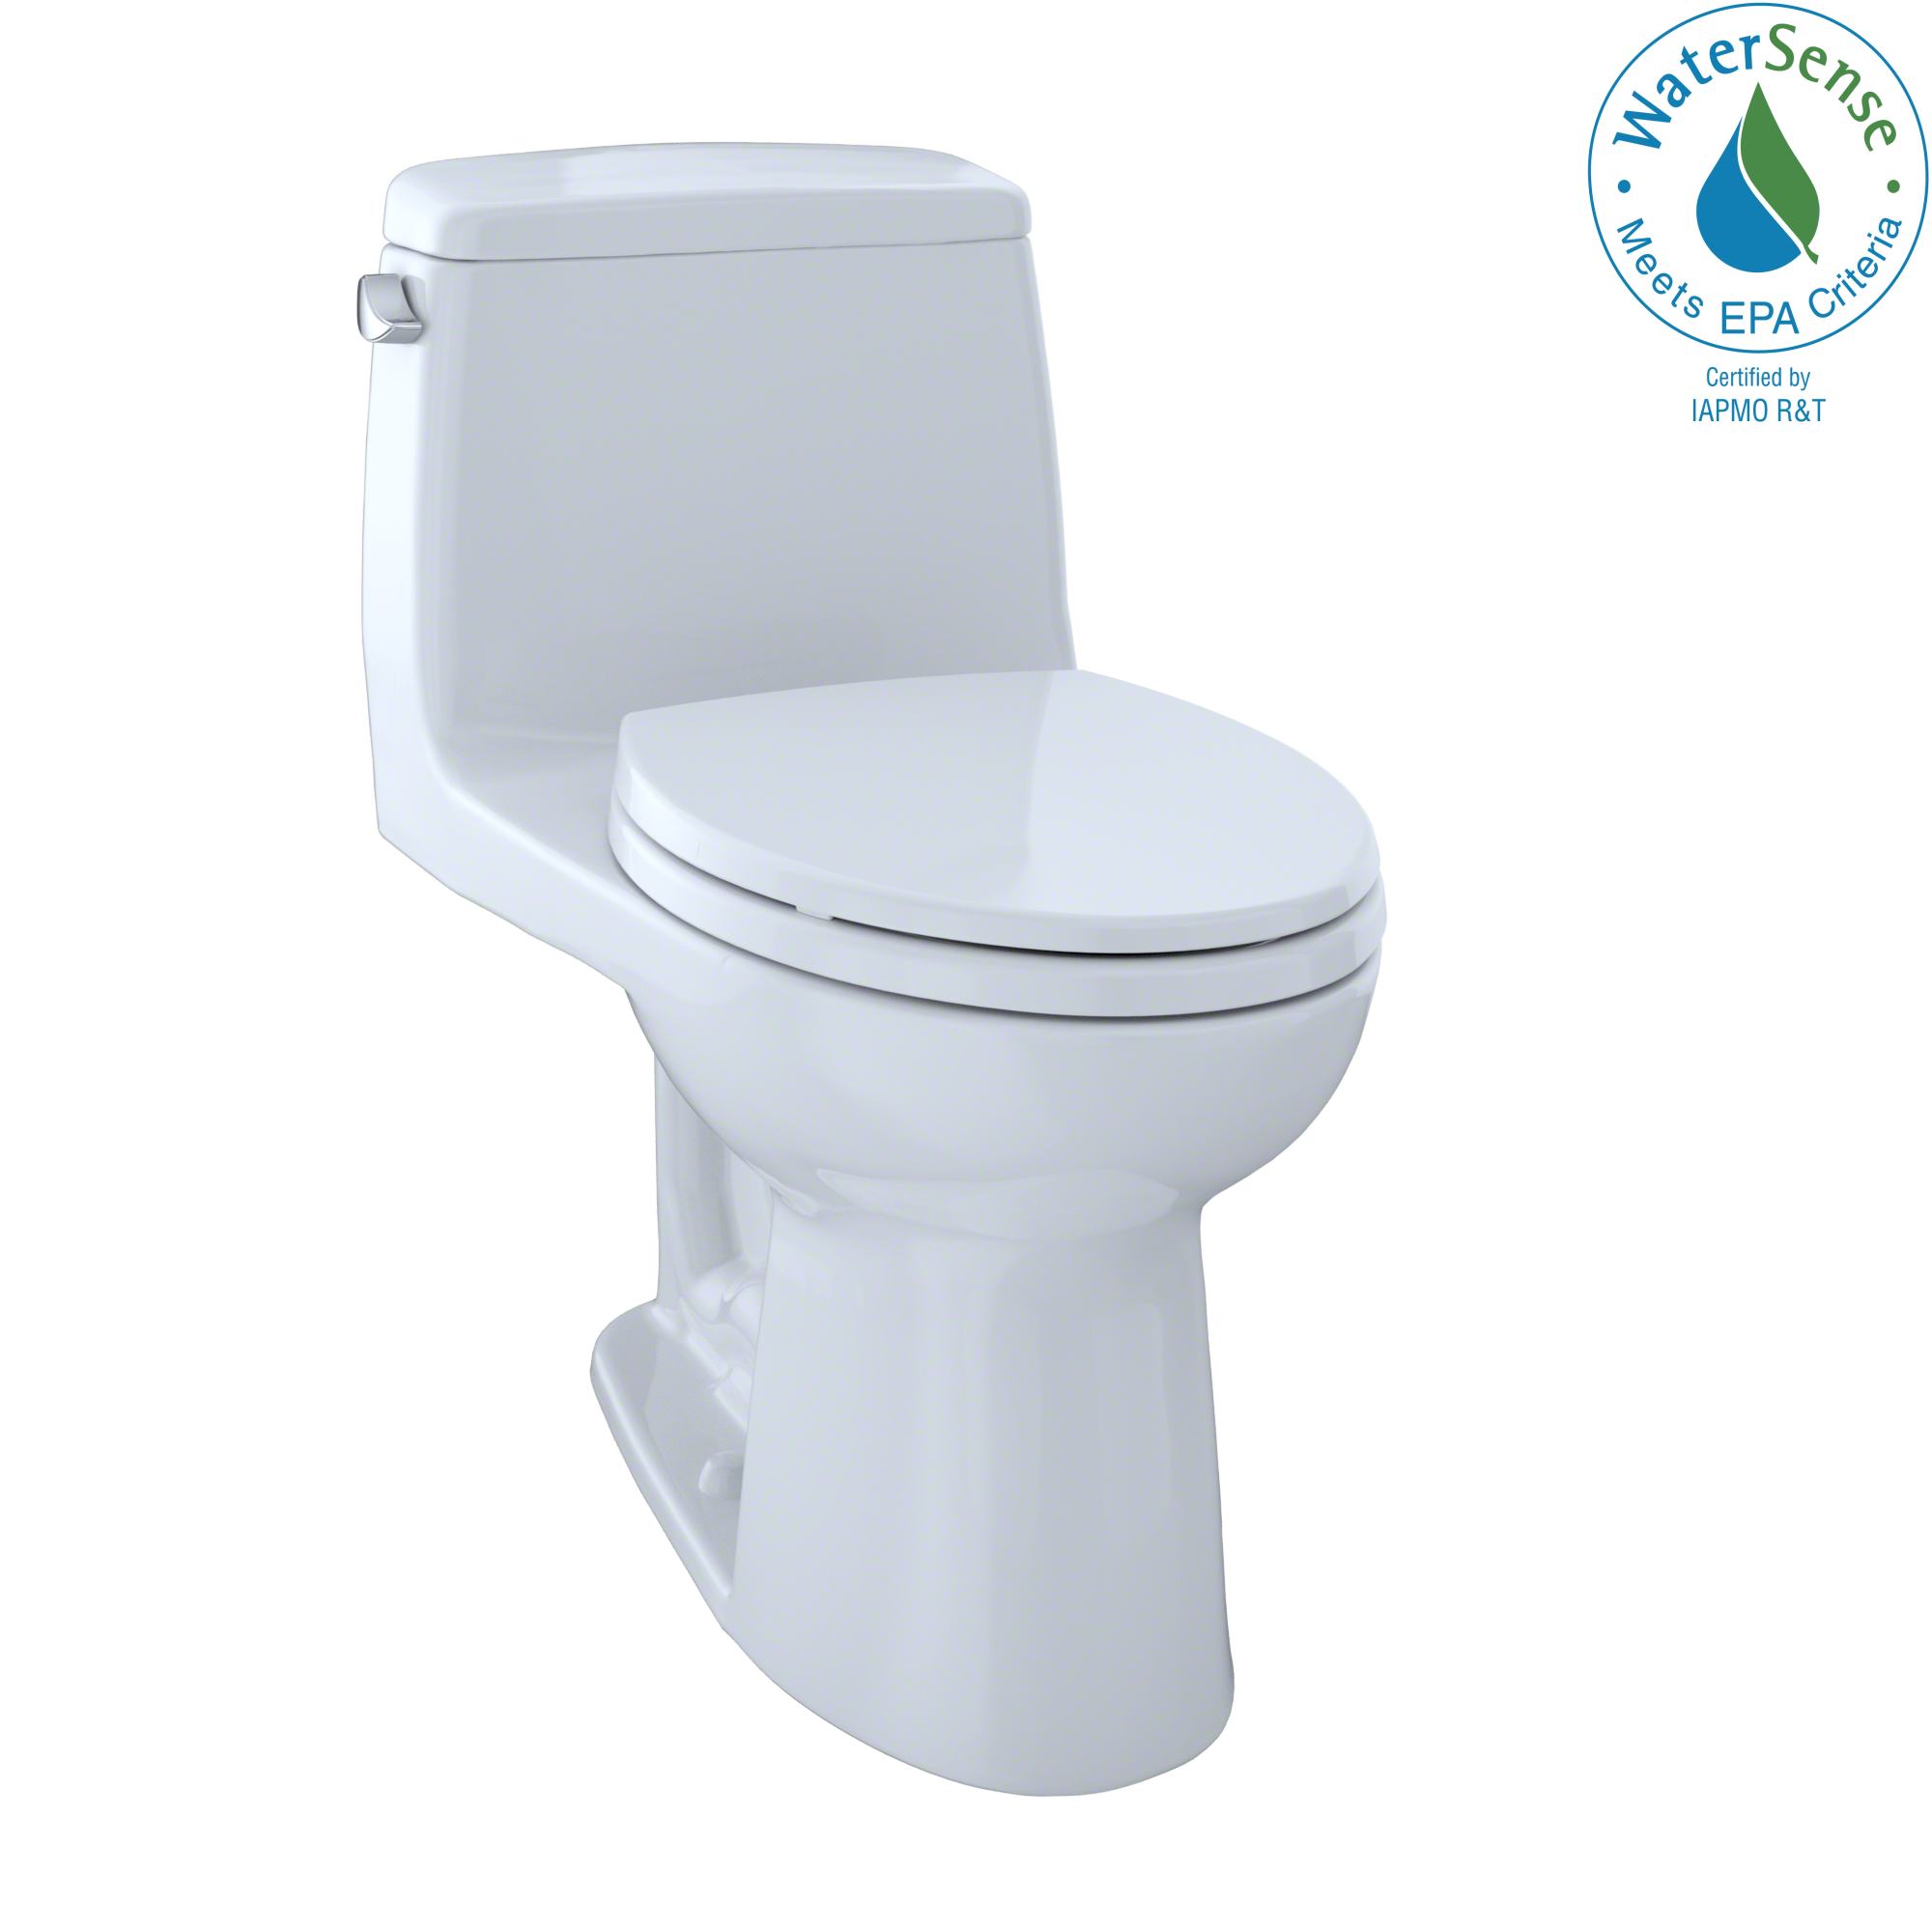 TOTO Eco UltraMax MS854114E#01 One Piece Elongated 1.28 GPF Toilet with E-Max Flush System - SoftClose Seat Included